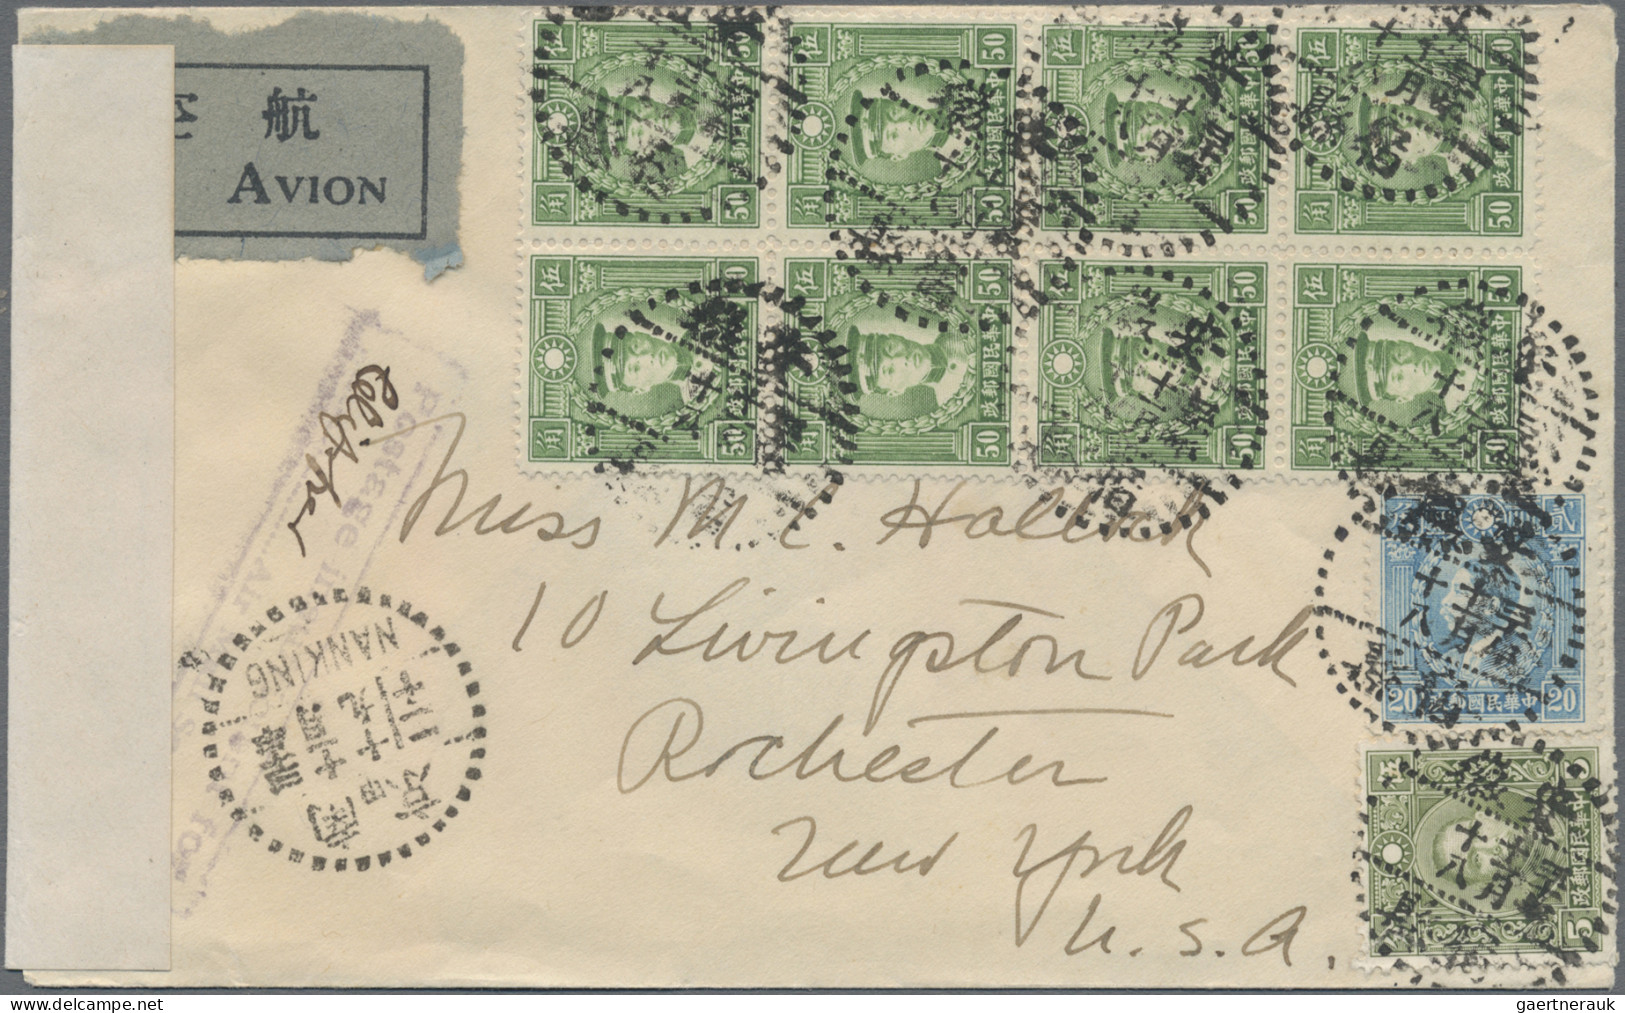 China: 1938/40, Airmail Cover Addressed To New York, U.S.A. Bearing SYS 5c, Mart - Covers & Documents